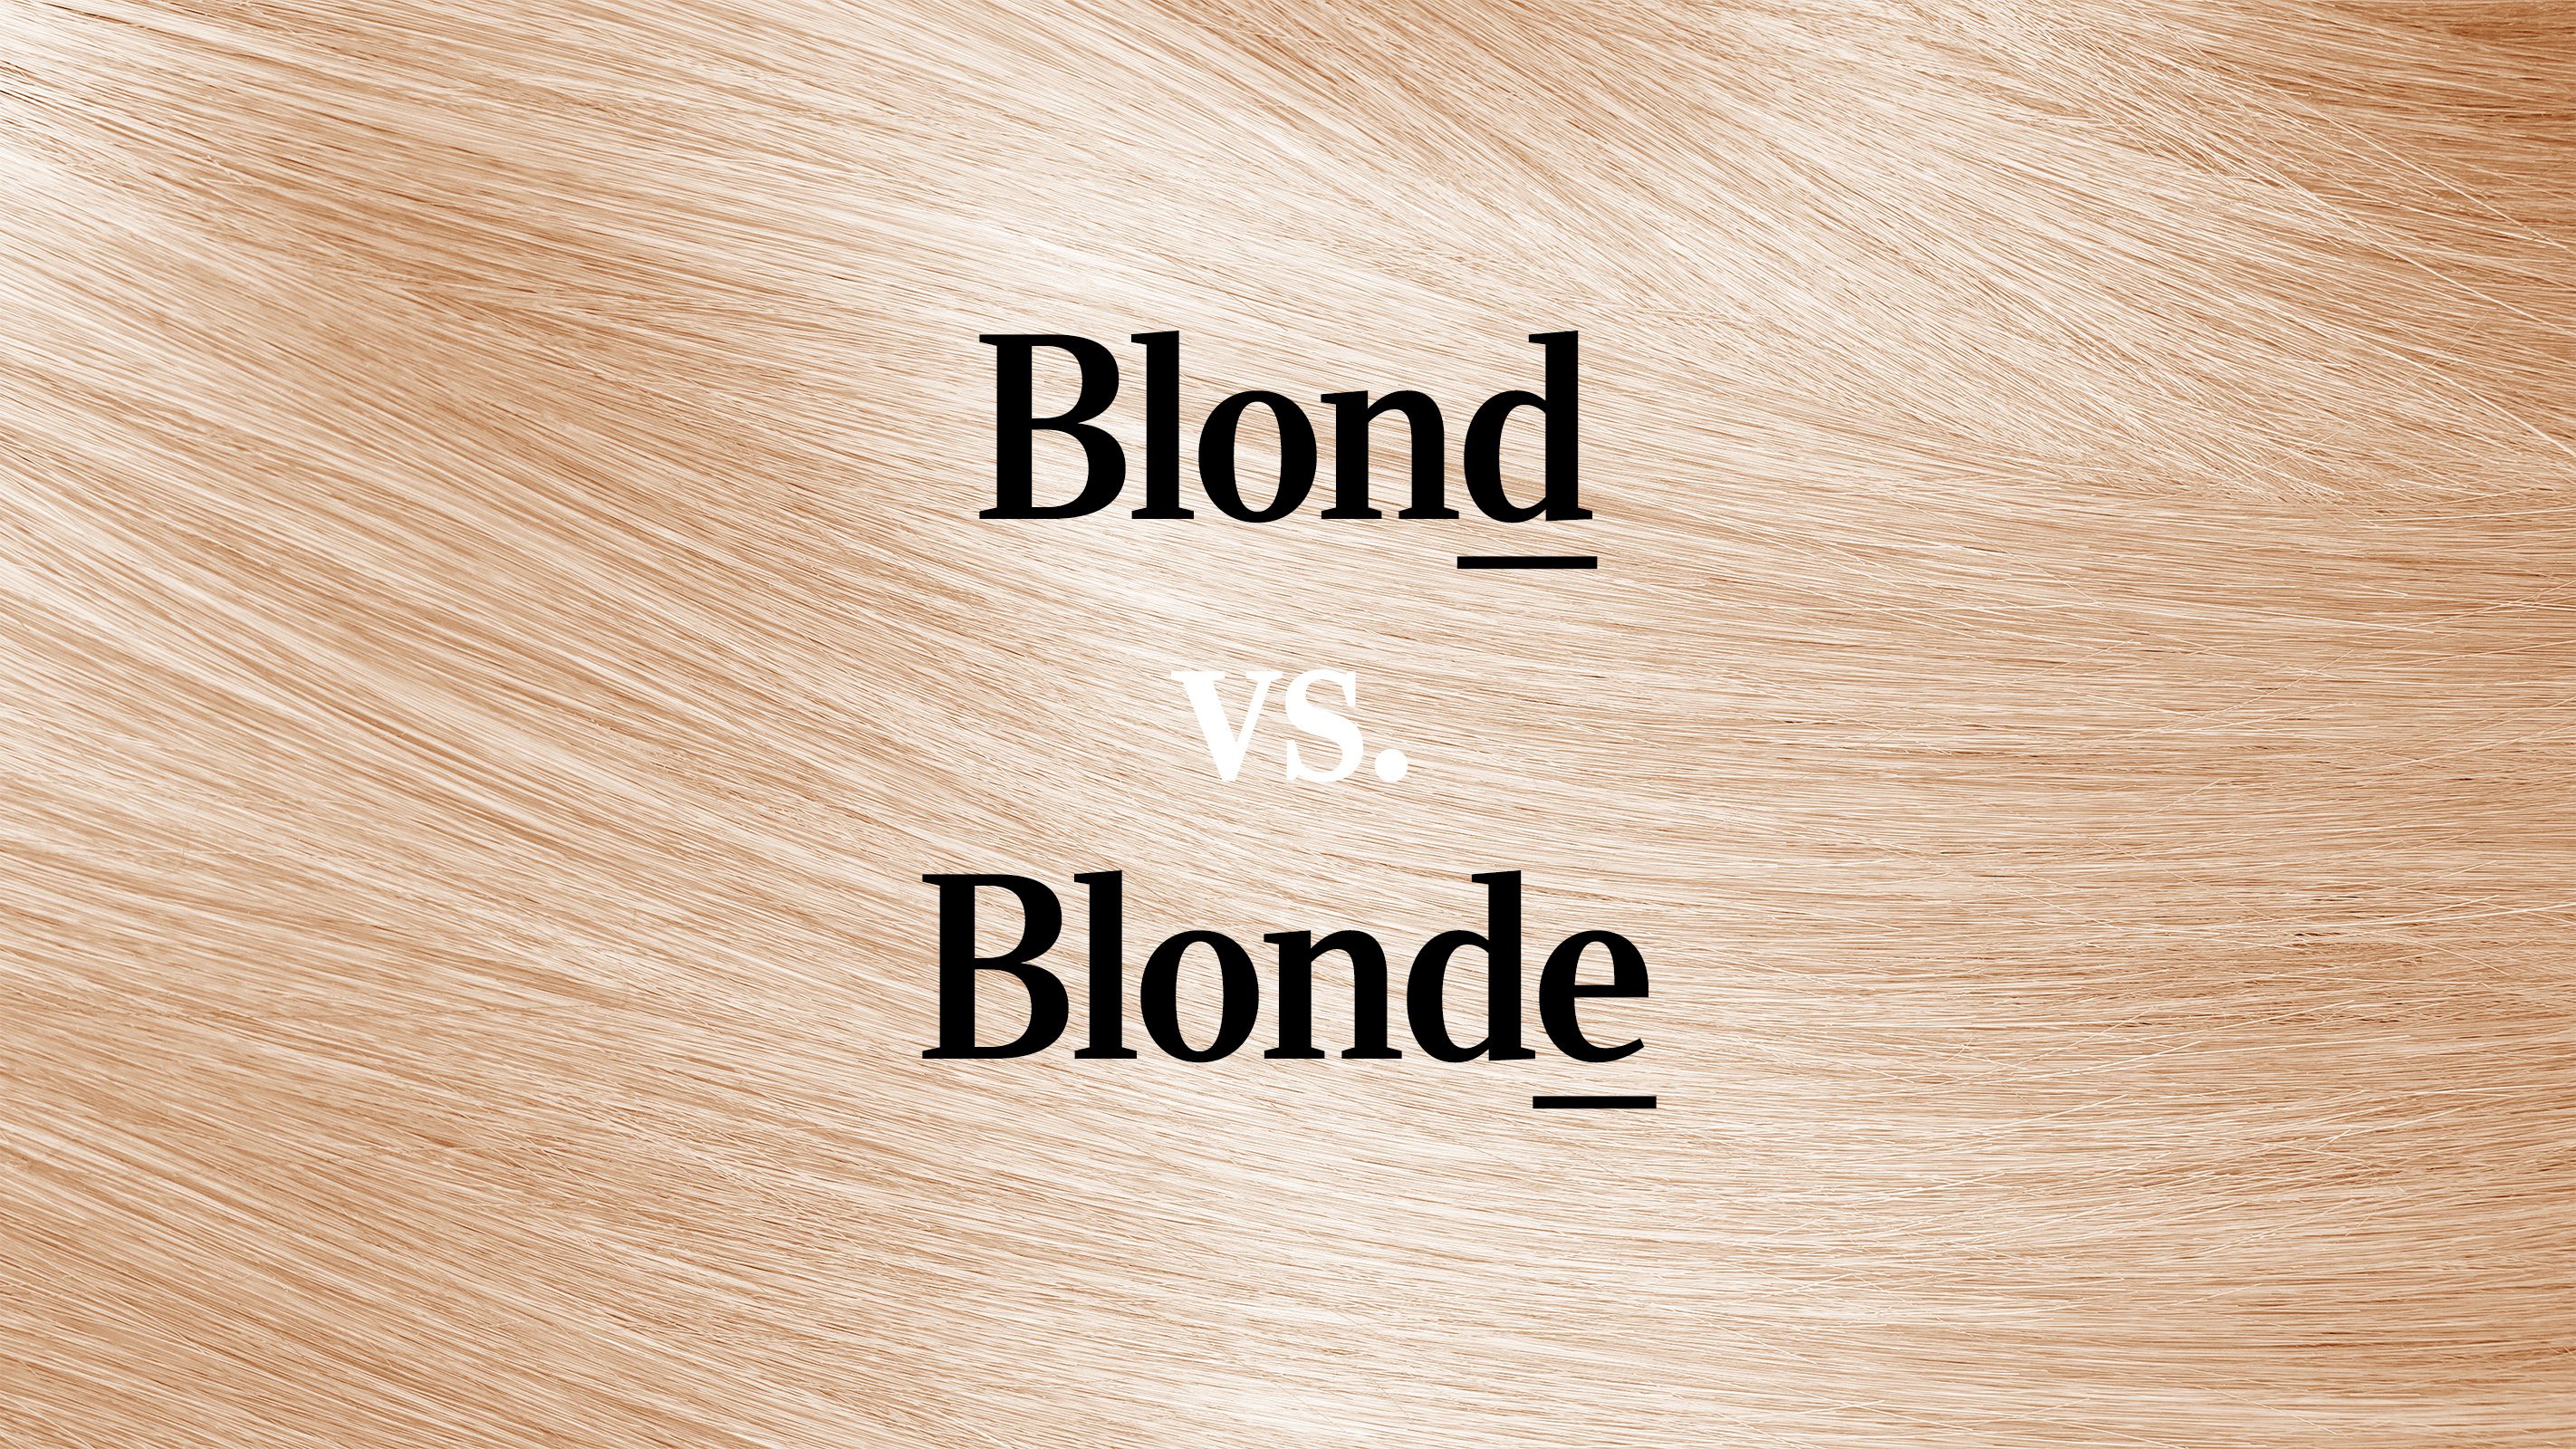 Blond Hair vs Dark Hair: What's the Difference? - wide 4